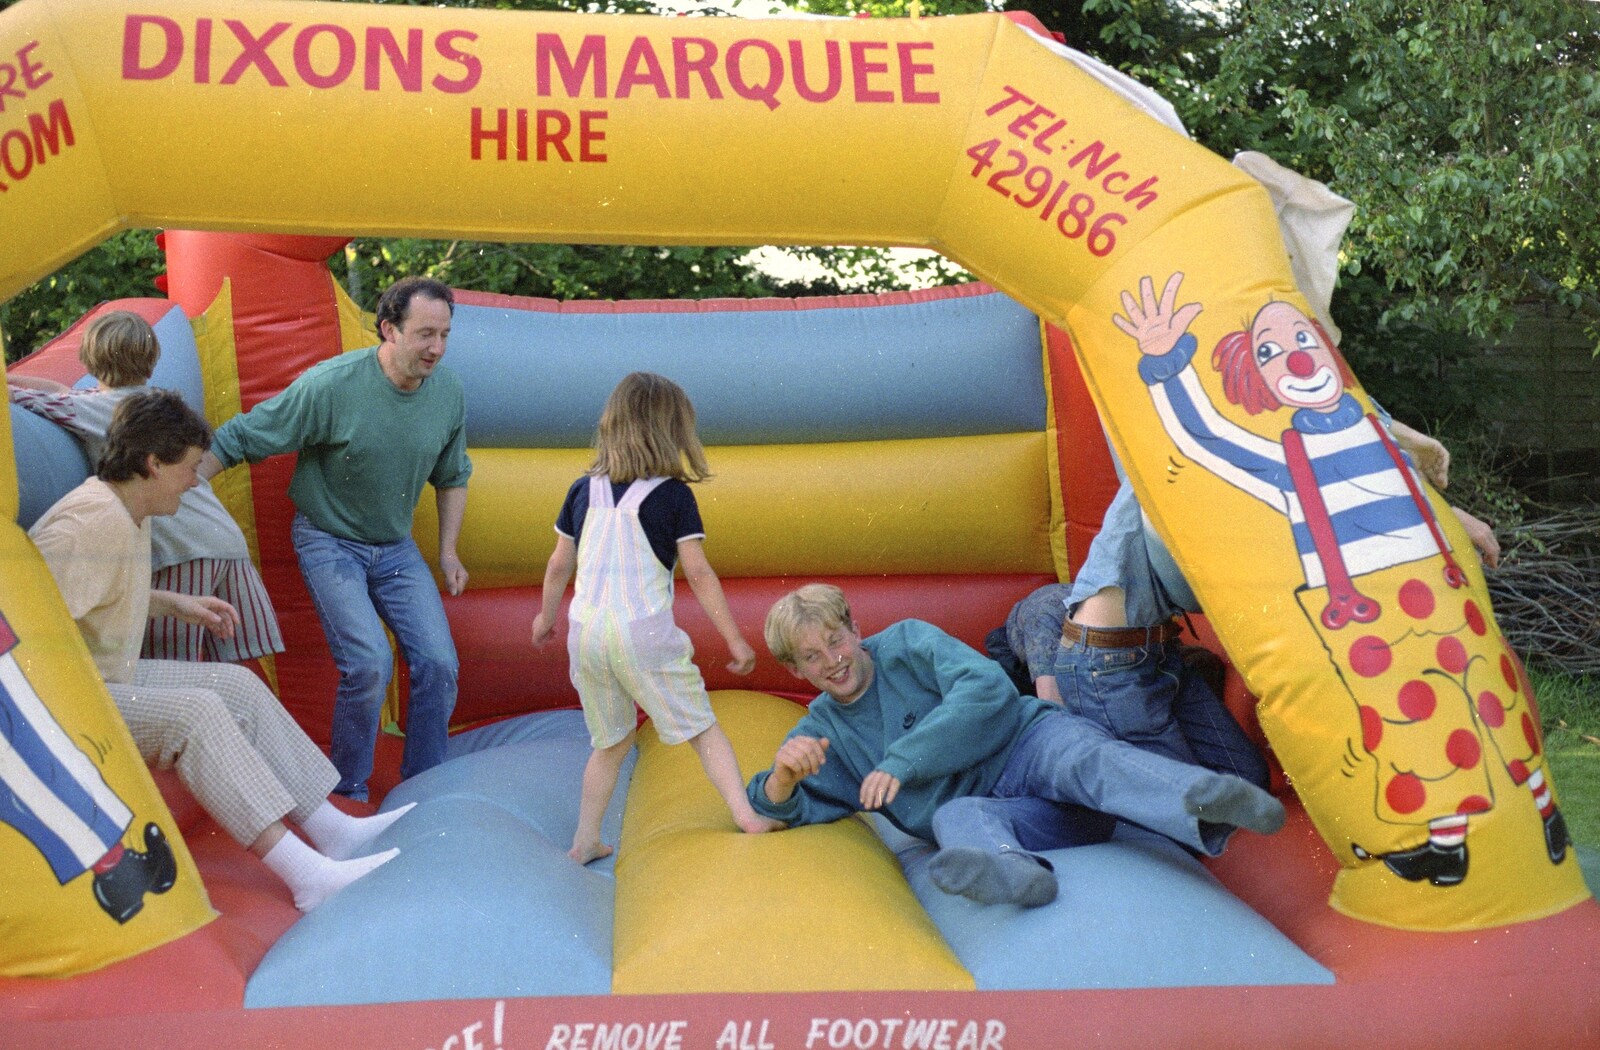 Pippa, DH and Paul bounce around from The Brome Swan at Keith's 50th, Thrandeston, Suffolk  - June 2nd 1998